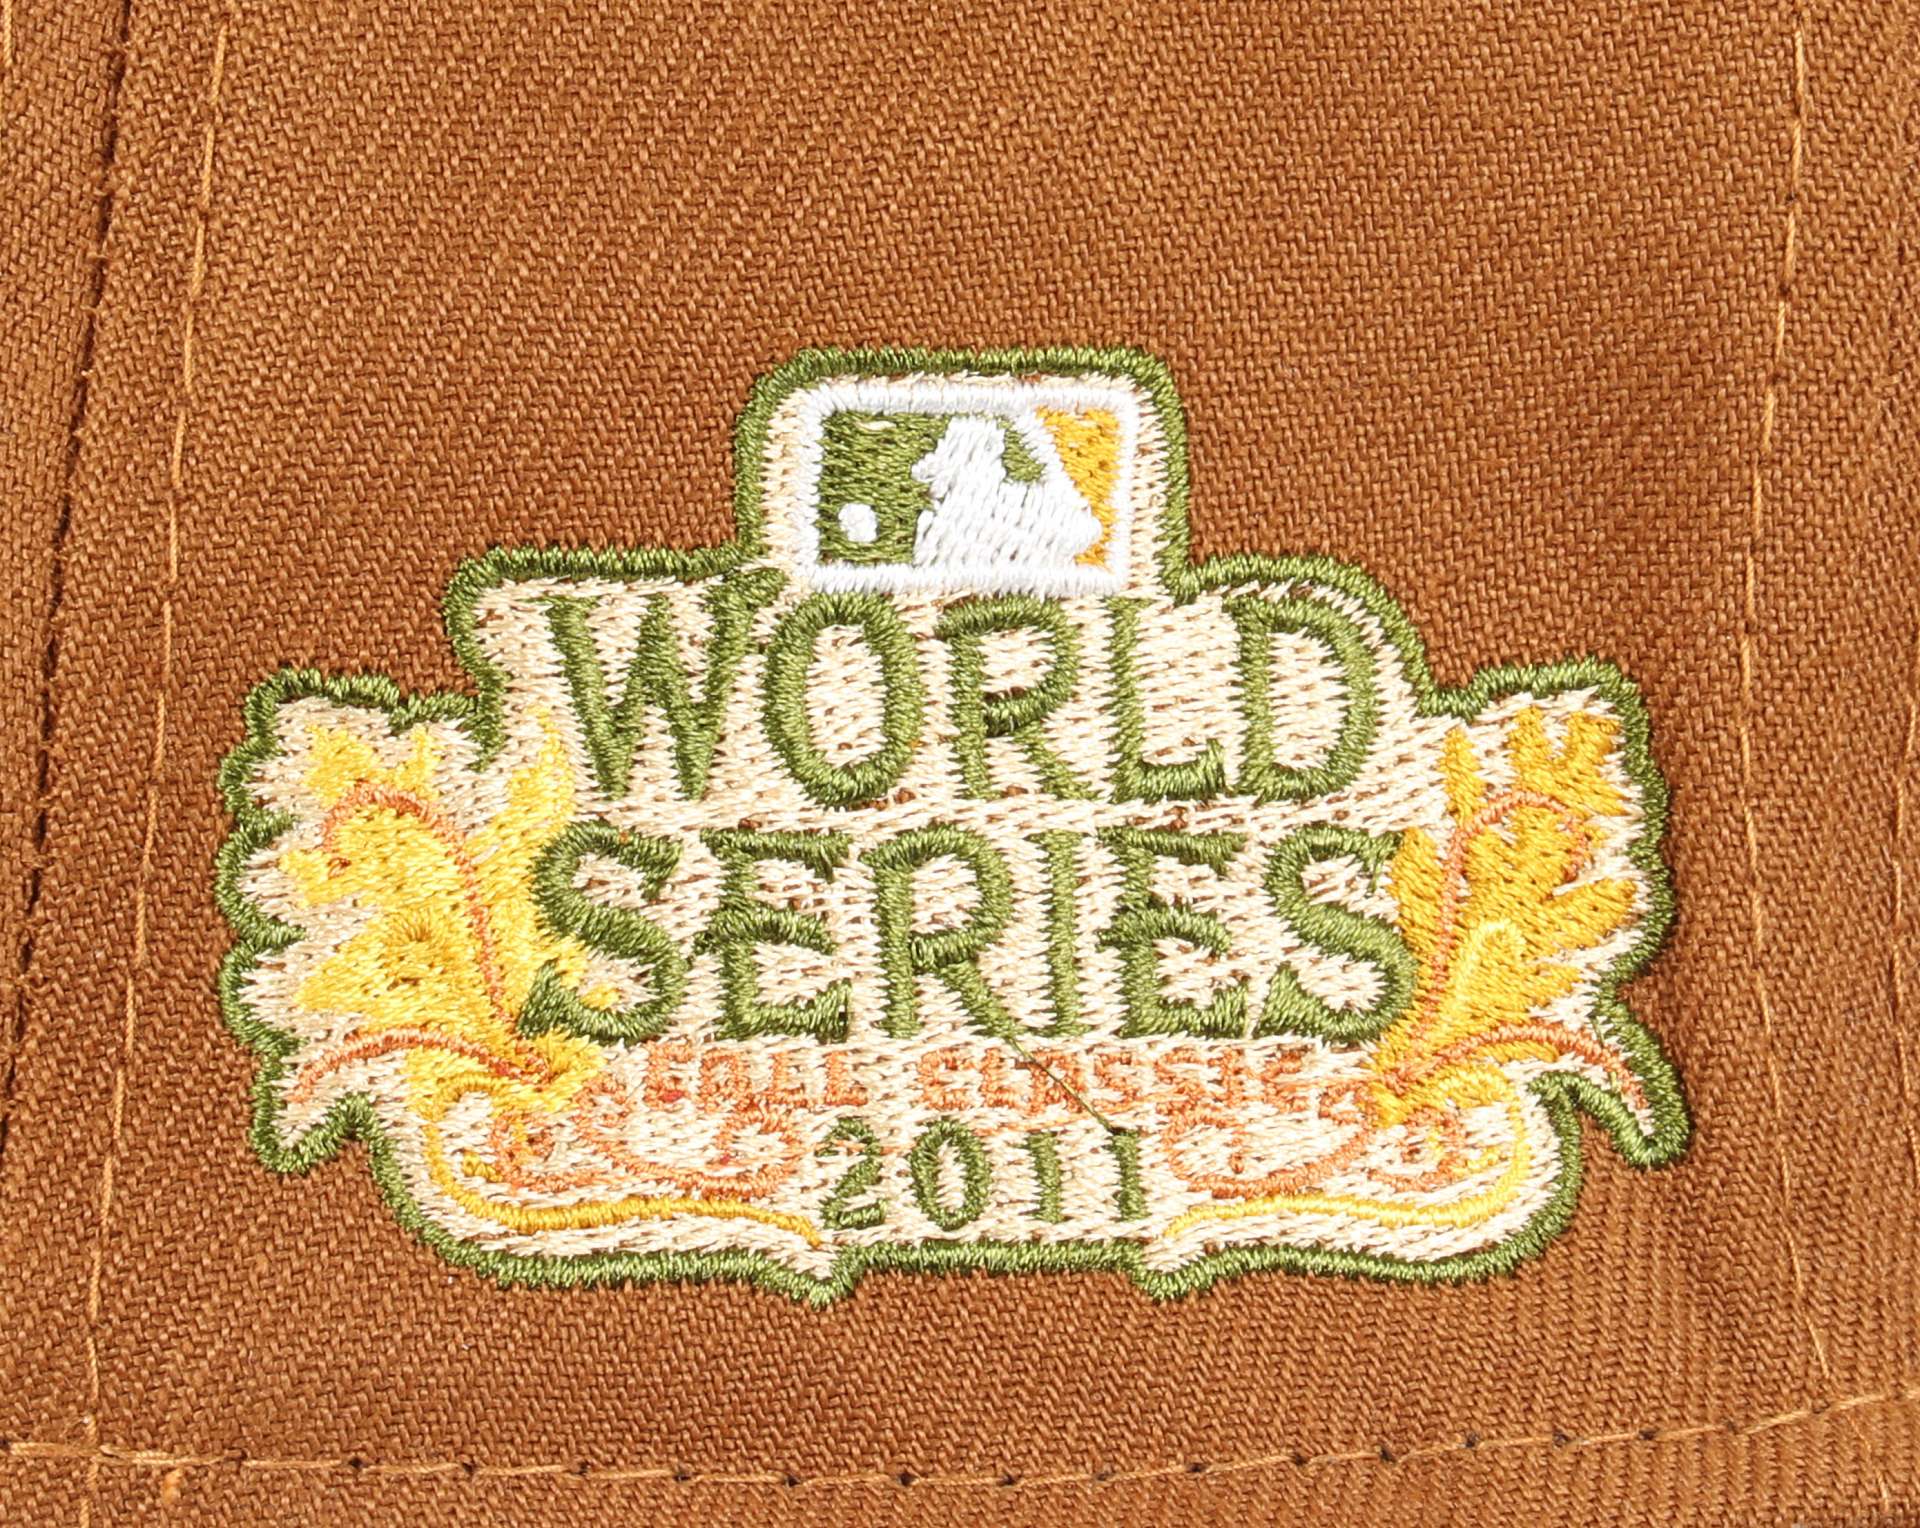 Texas Rangers MLB Cooperstown World Series  2011 Sidepatch Toasted Olive 59Fifty Basecap New Era